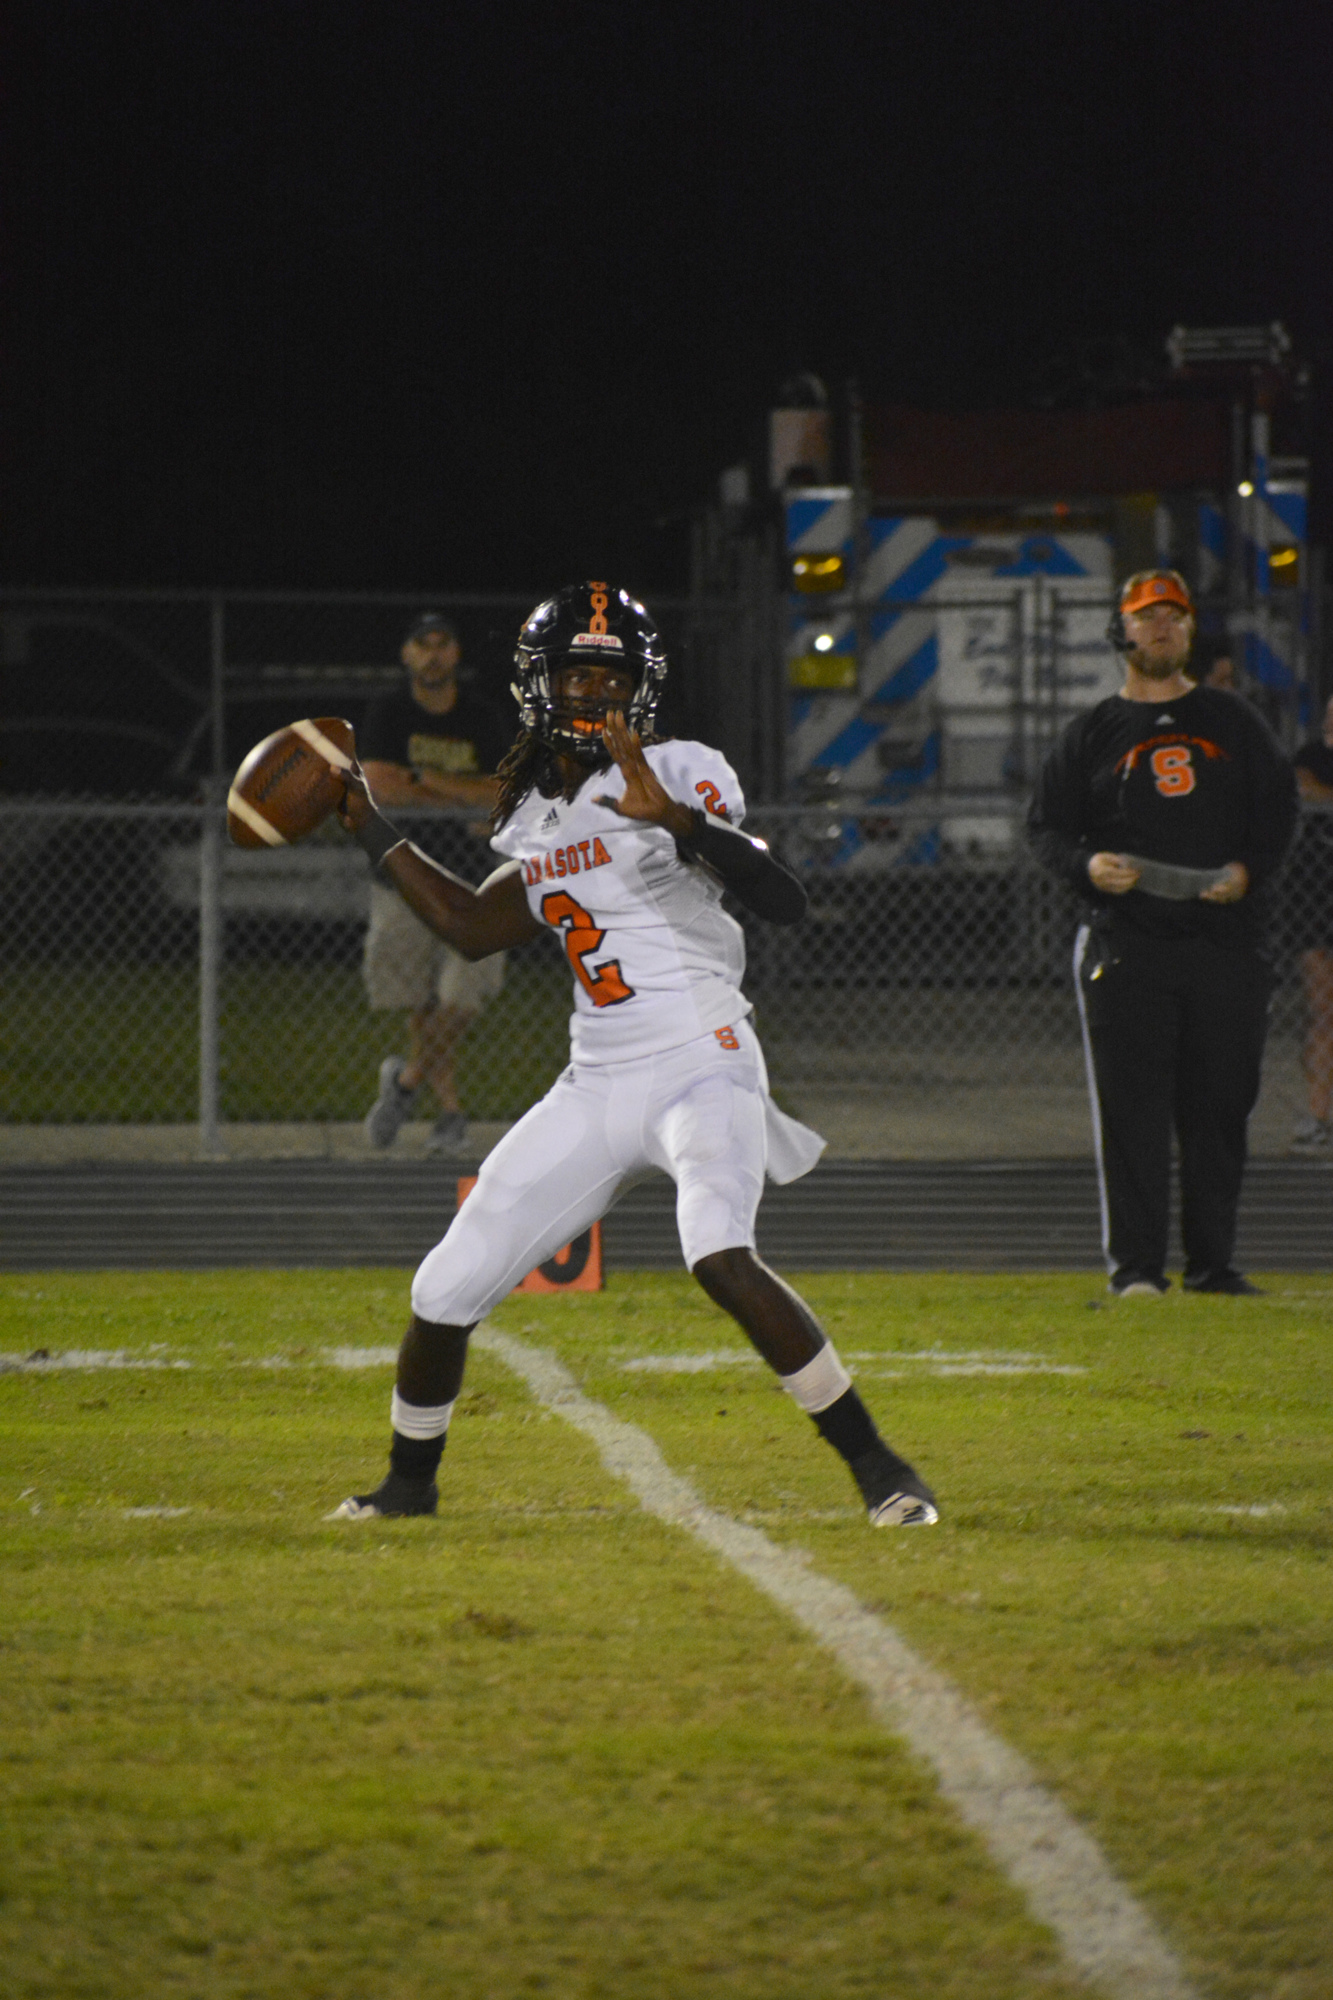 Robbie Peterson was thrust into the QB role this season for Sarasota High.